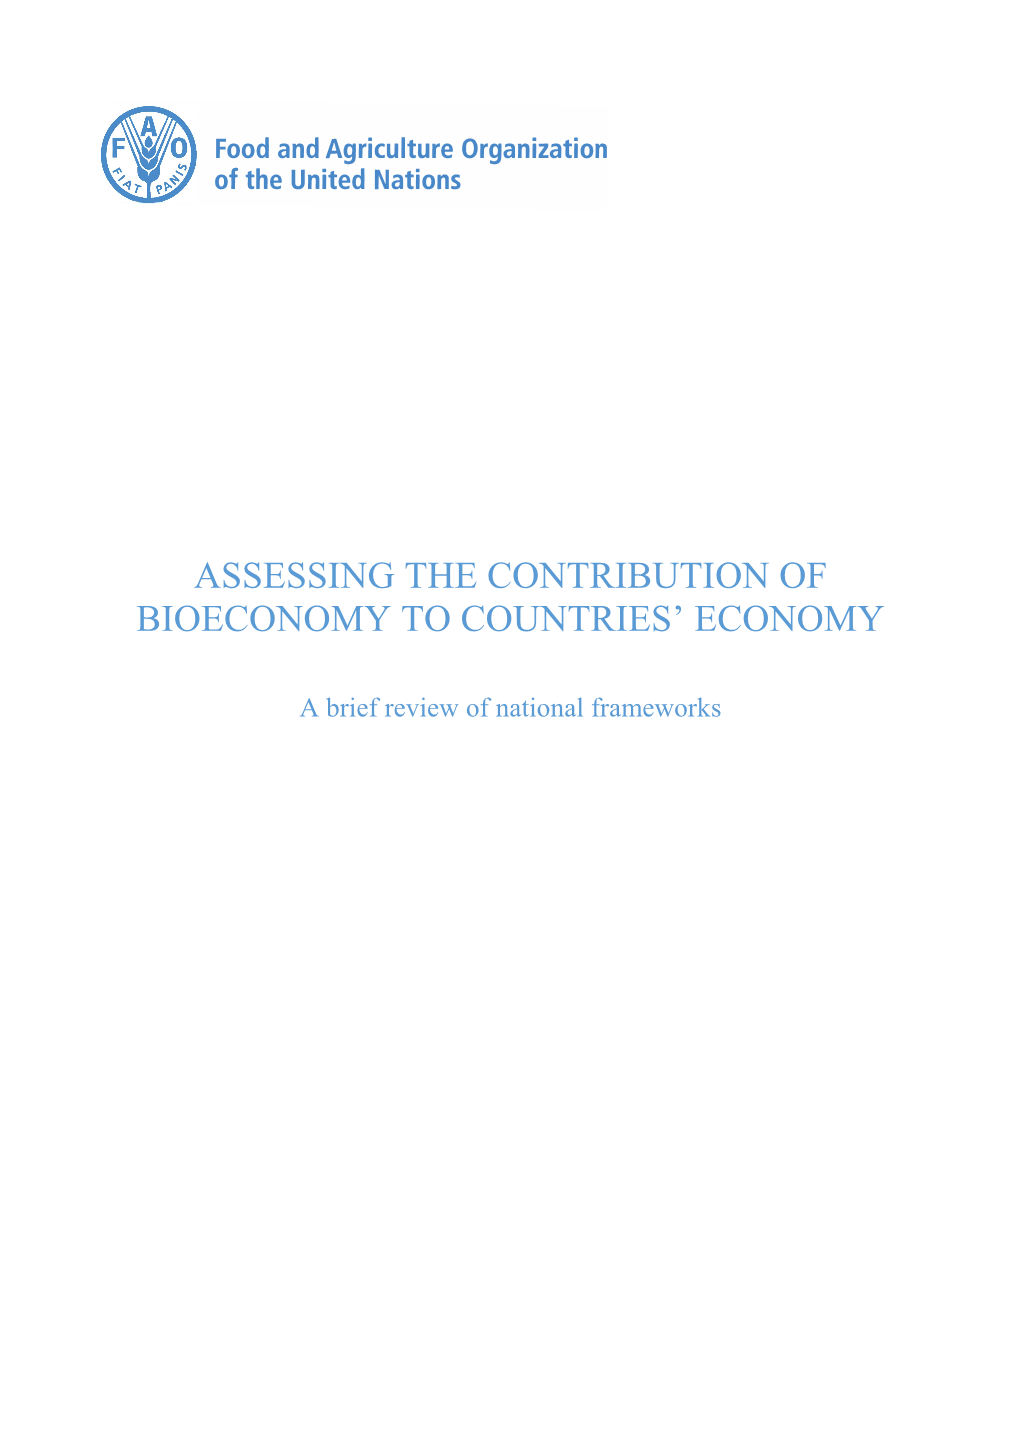 Assessing the Contribution of Bioeconomy to Countries' Economy